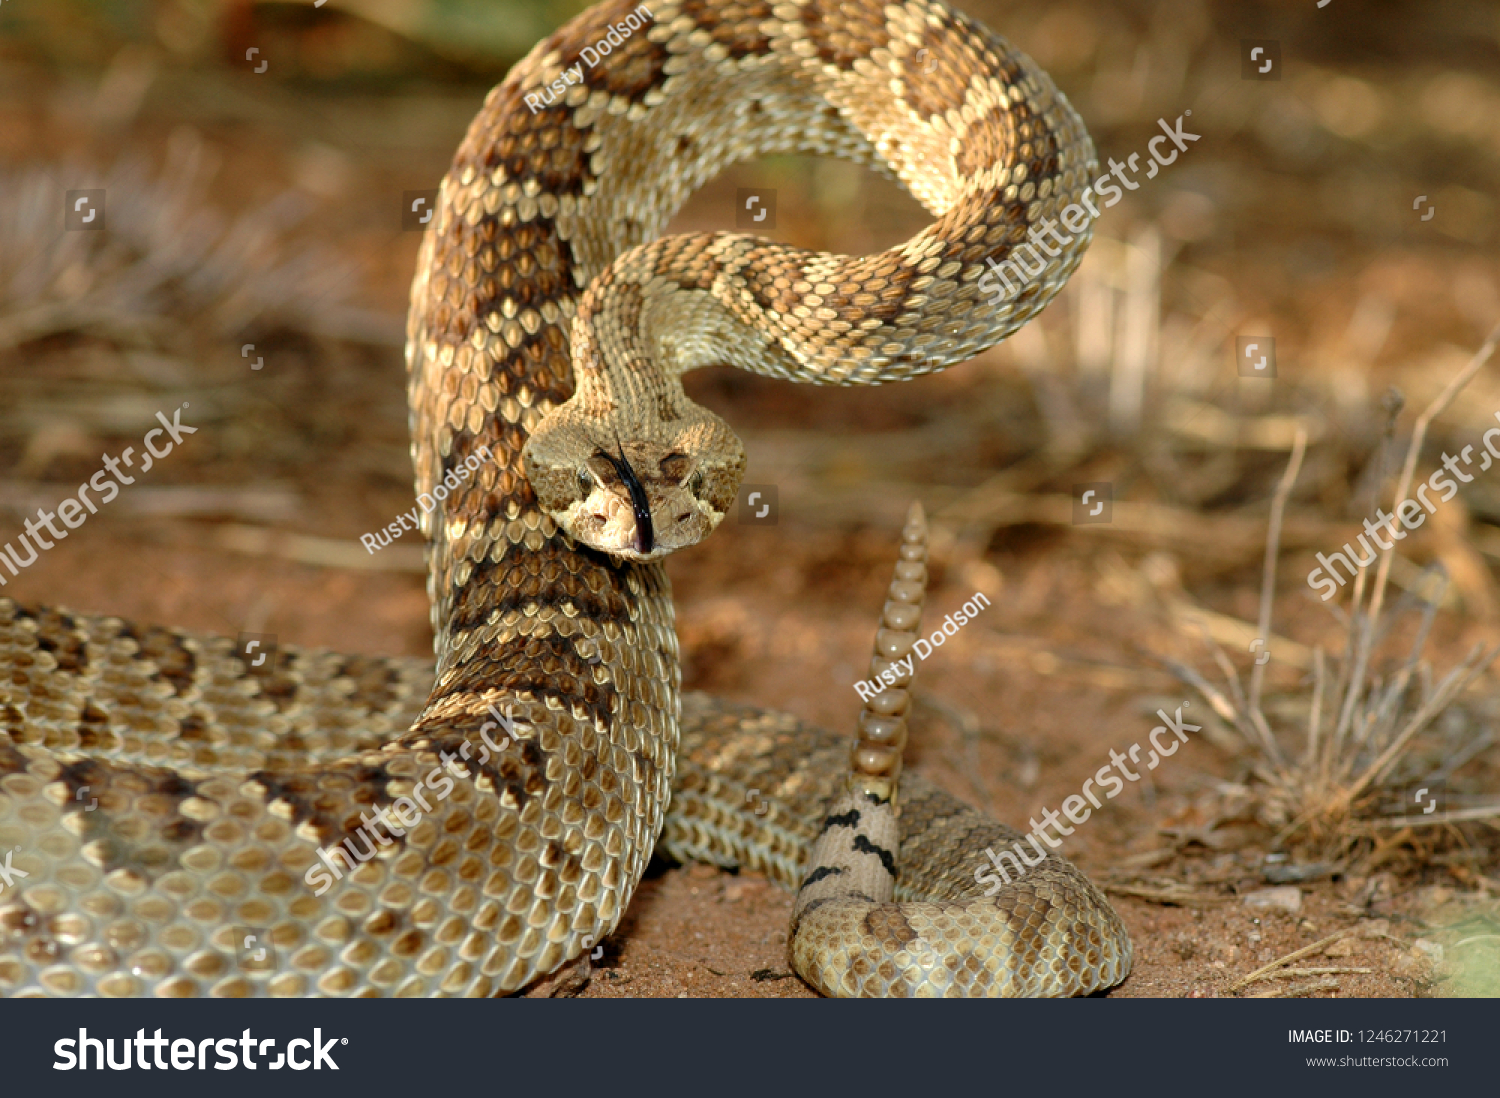 An adult mojave rattlesnake in a defensive stance. #1246271221